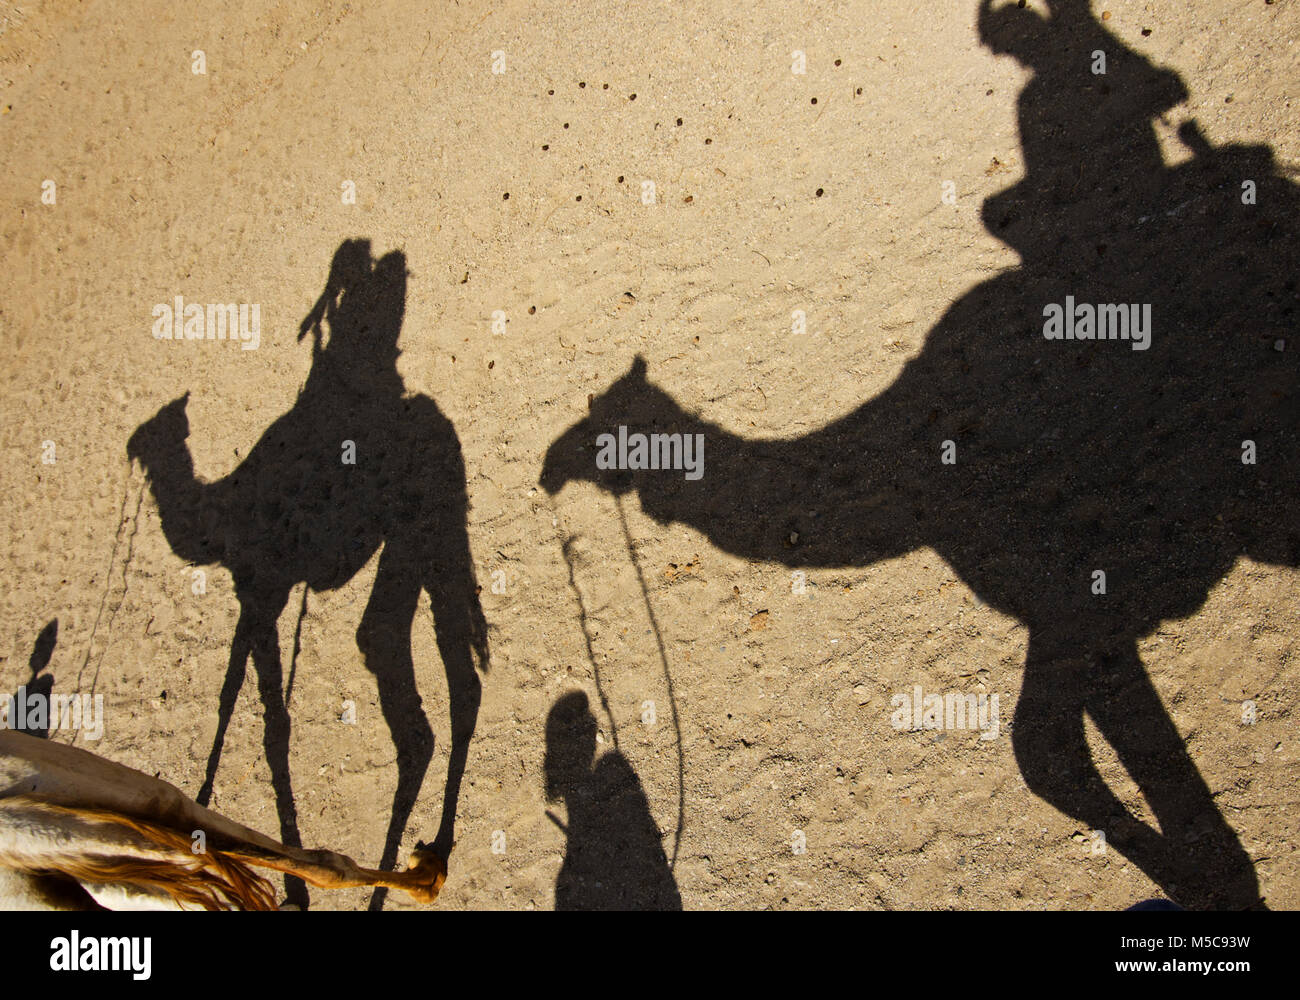 Shadows of camels on the sand Stock Photo